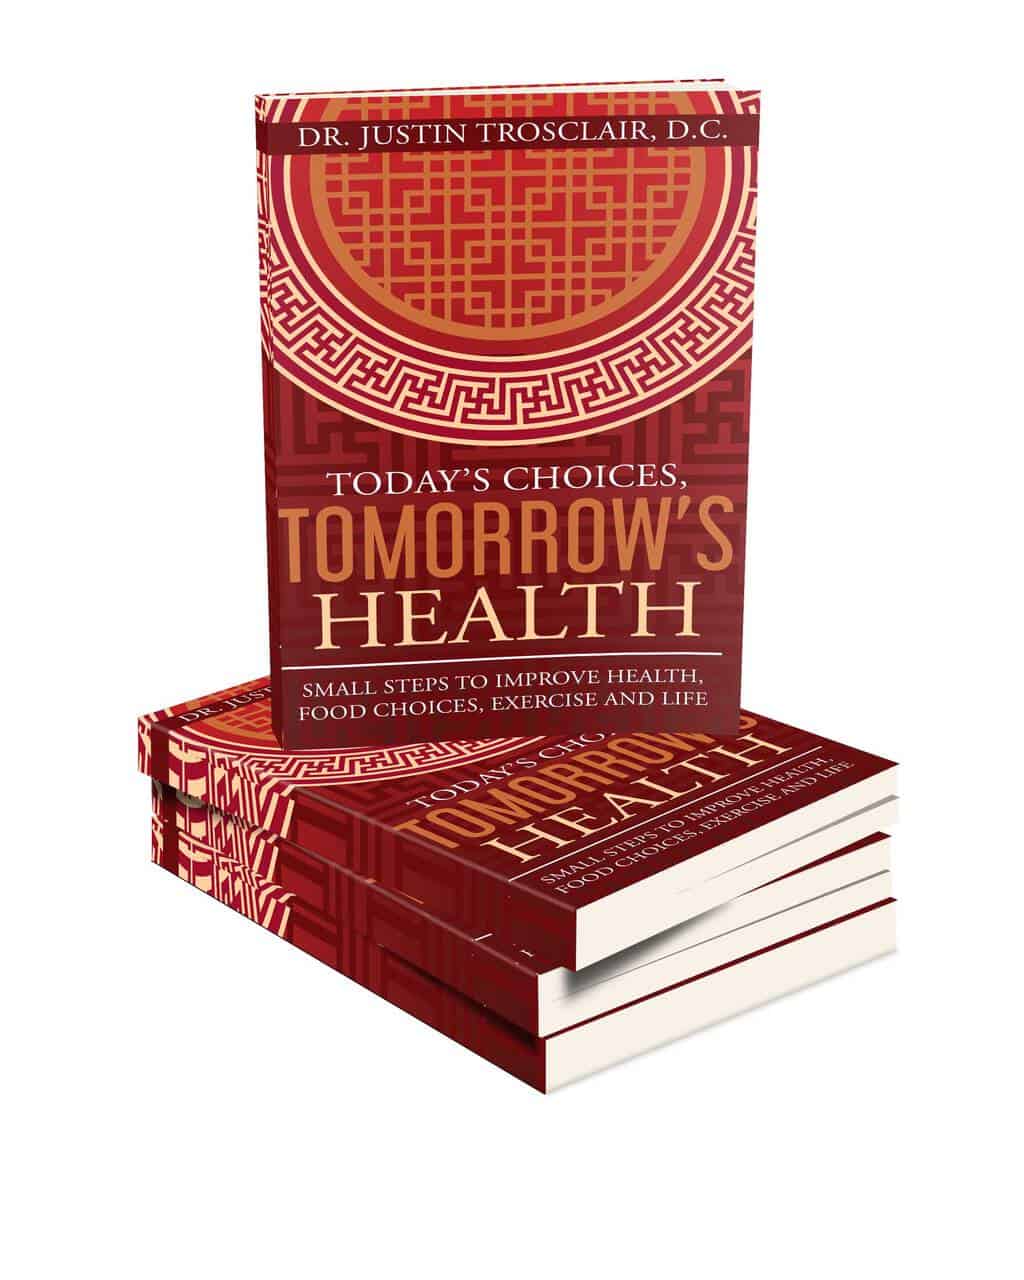 todays choices tomorrows health 3d book stack